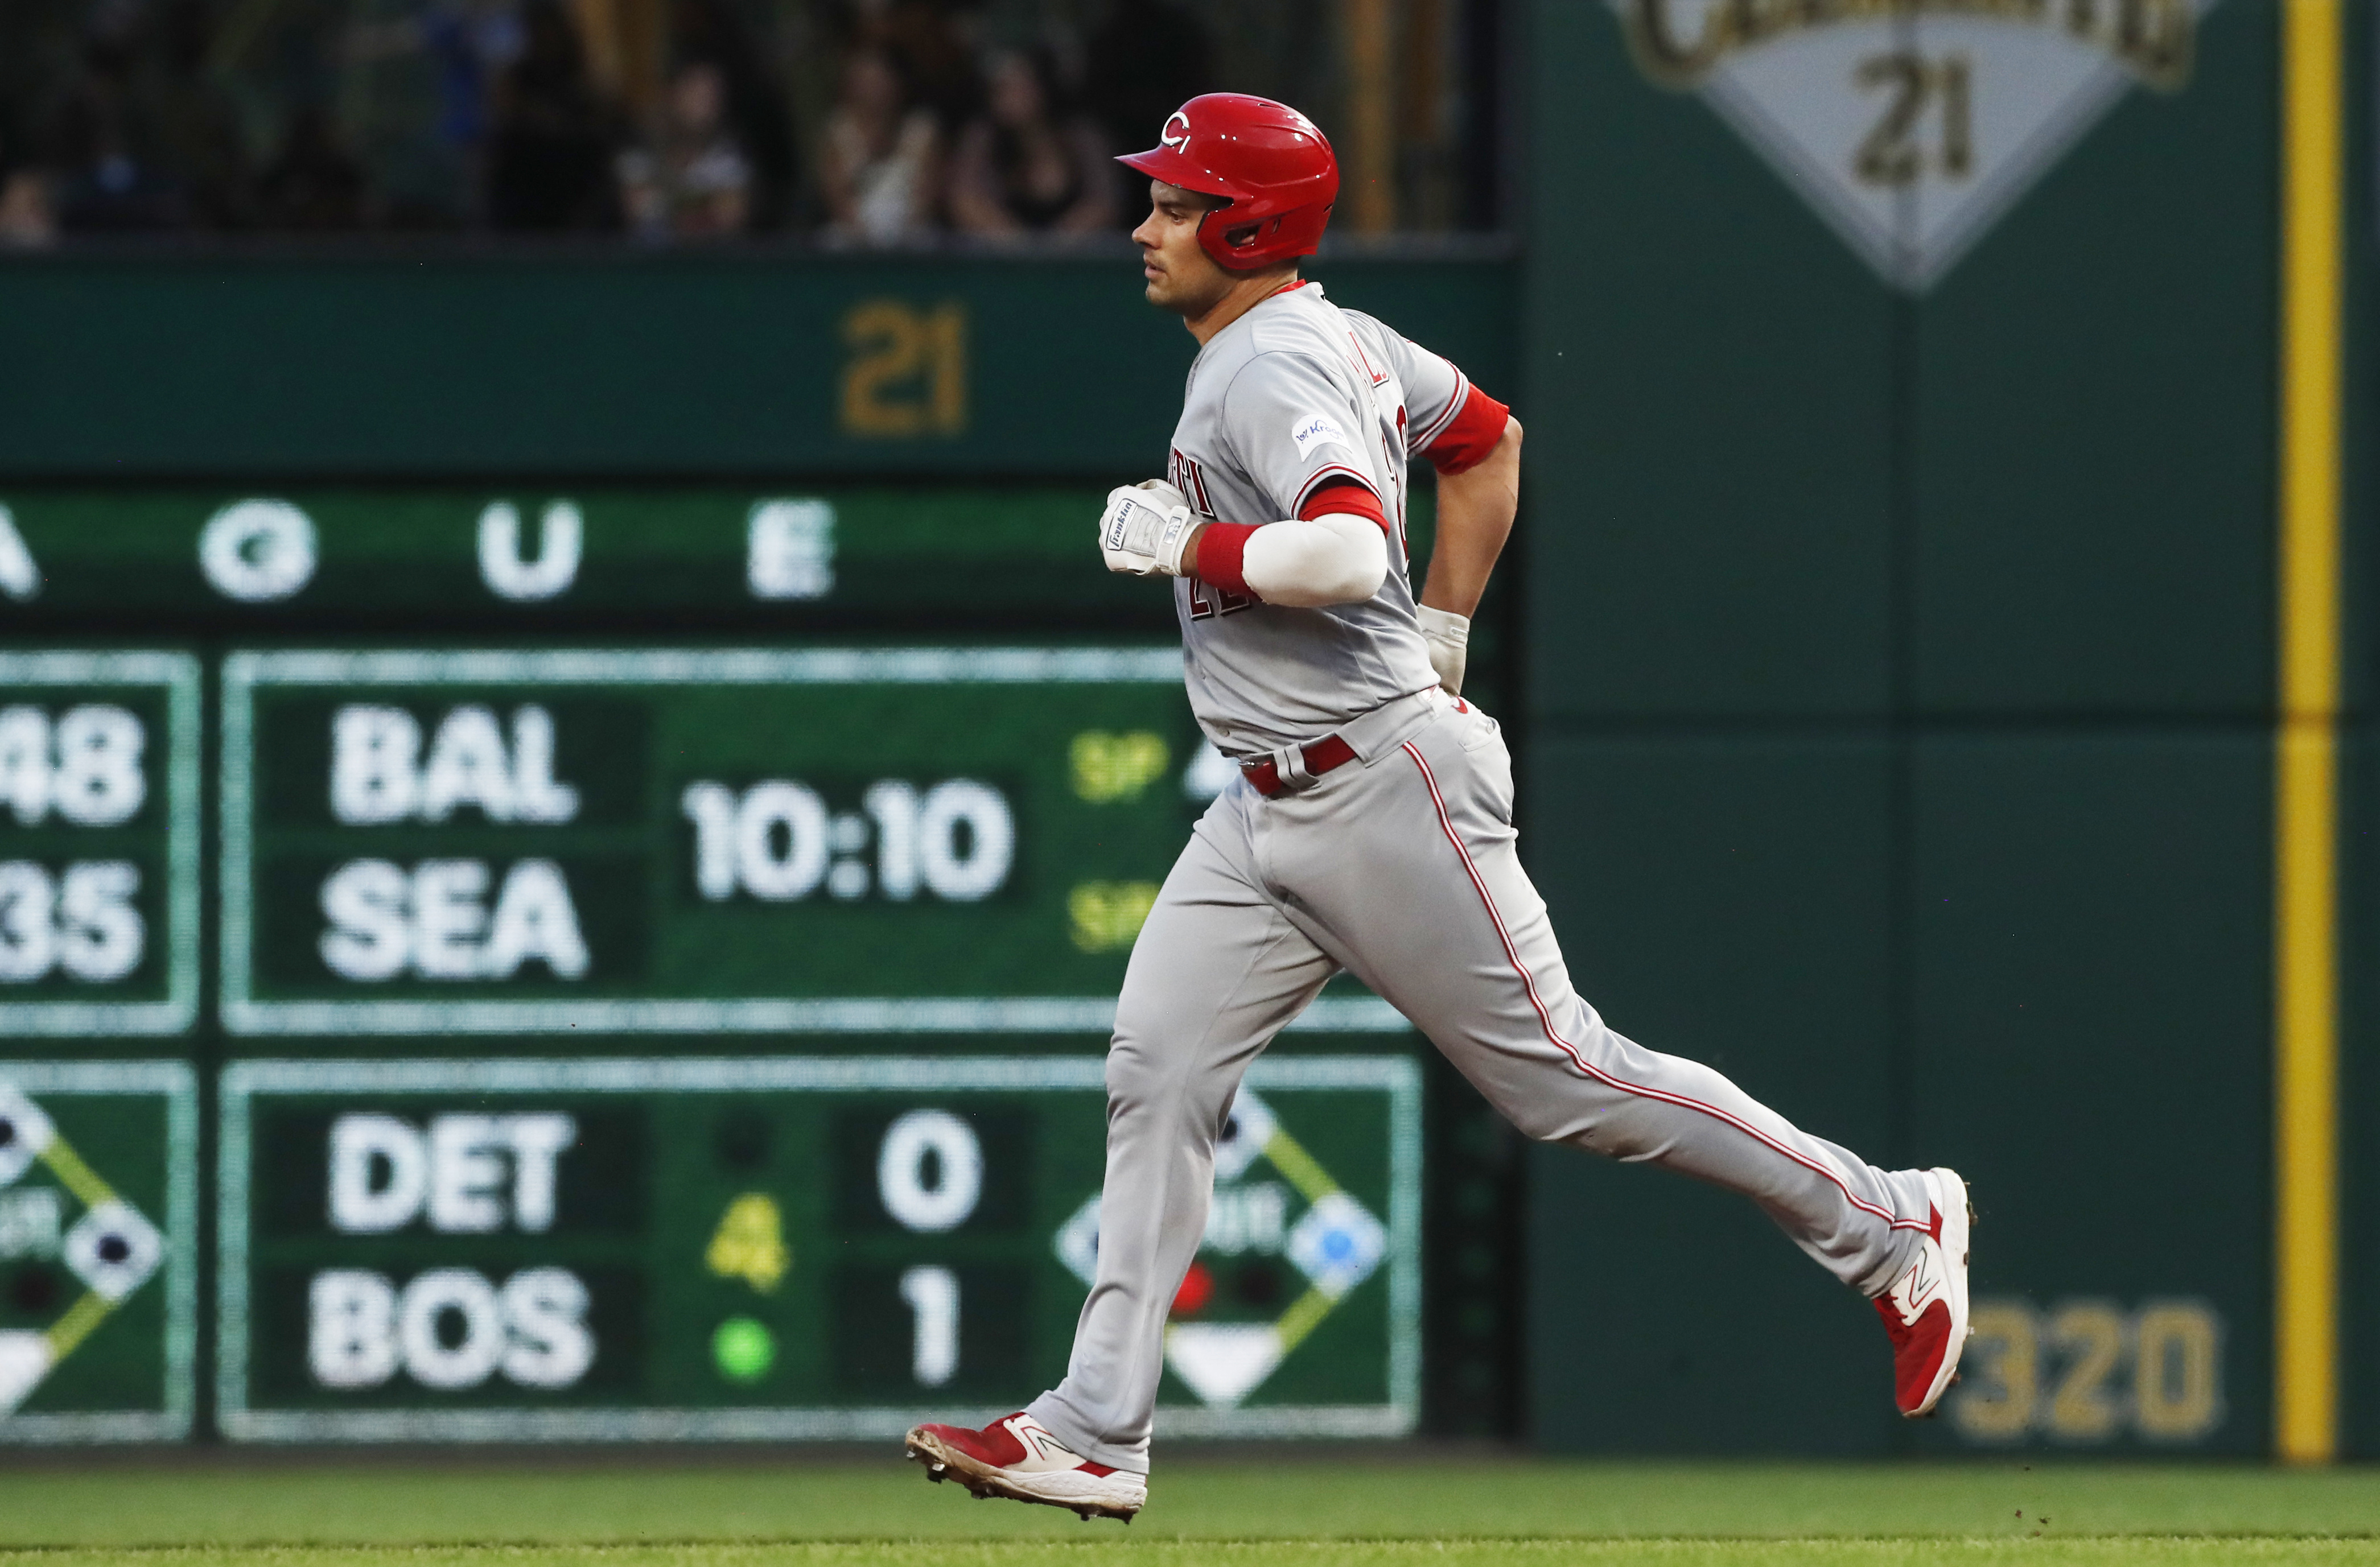 Reds bust out of slump, beat Pirates 9-2